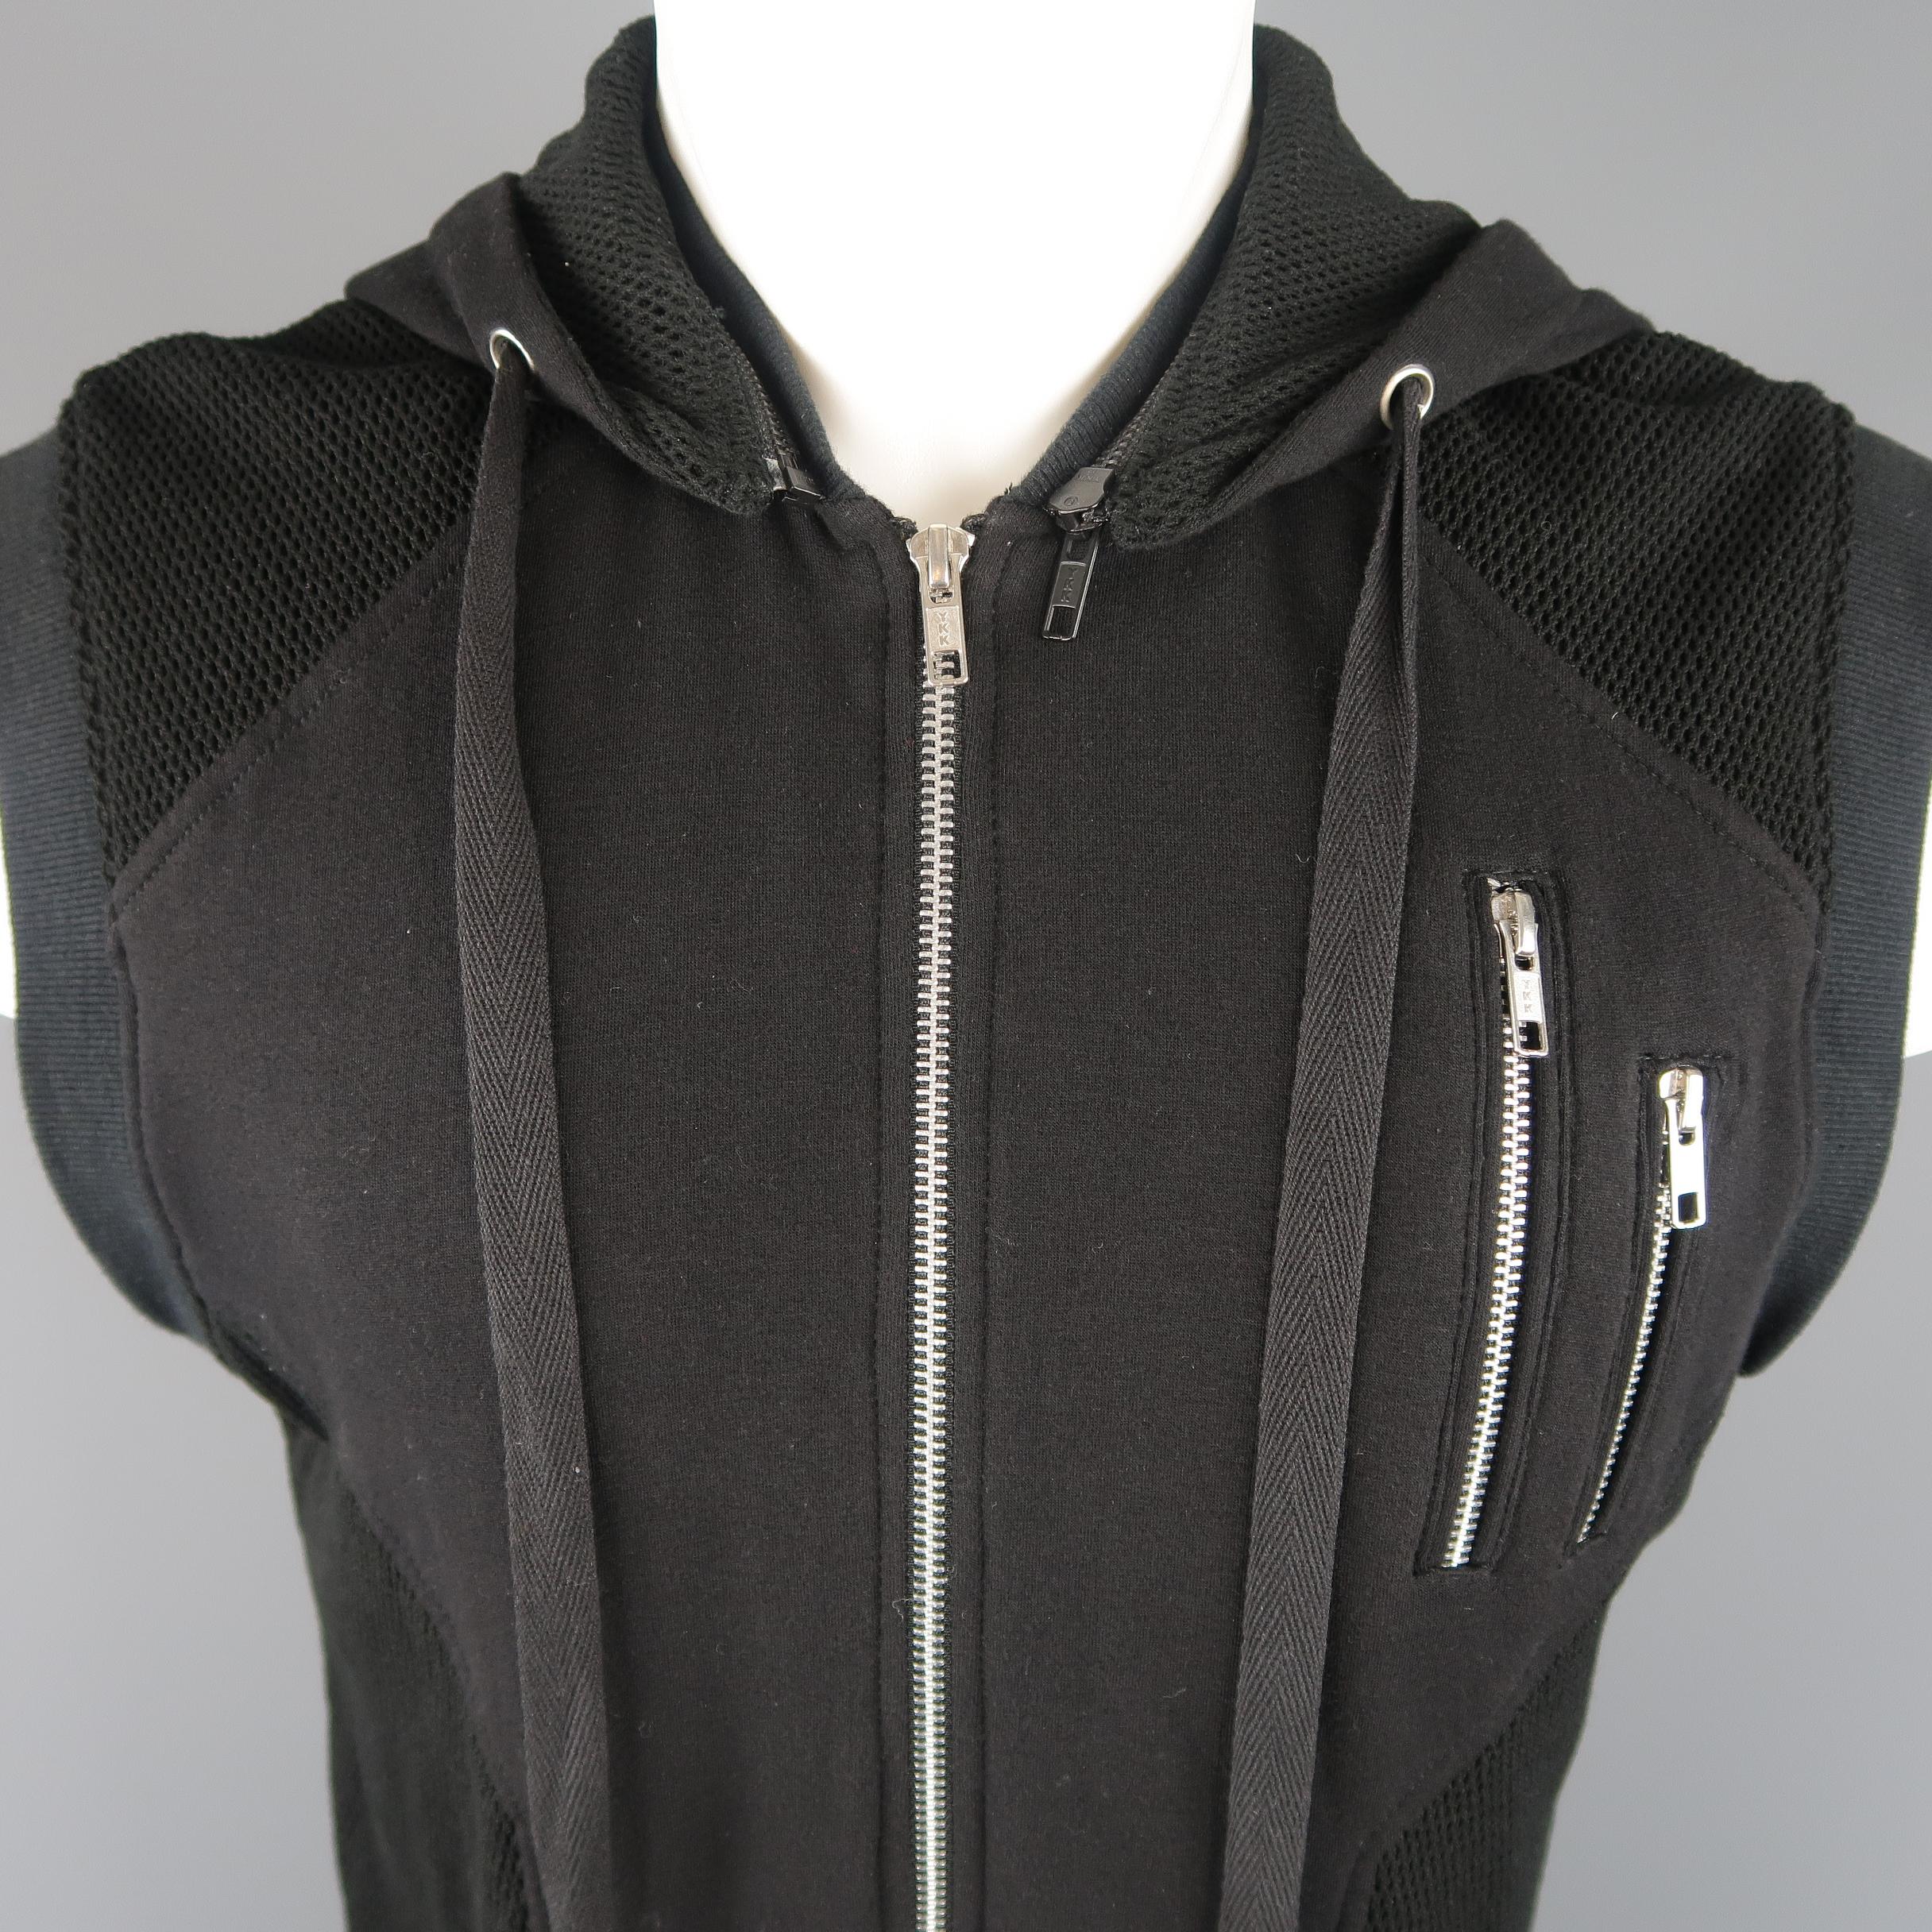 SKINGRAFT vest comes in black cotton jersey with mesh panels, zip pockets, layered effect, and zip off hood. Wear throughout.
 
Good Pre-Owned Condition.
Marked: S
 
Measurements:
 
Shoulder: 16 in.
Chest: 42 in.
Length: 24-32 in.